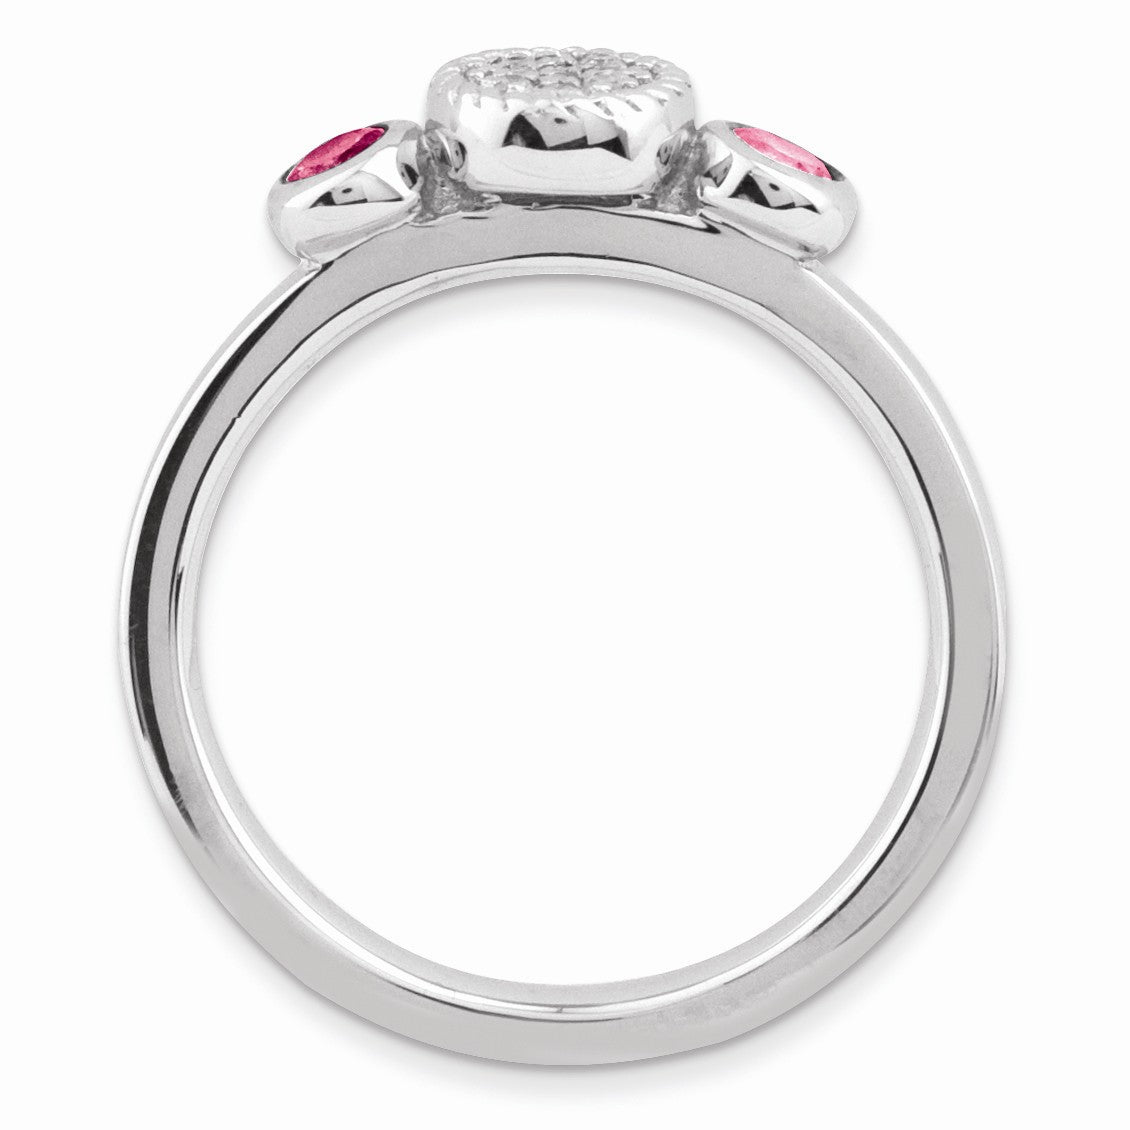 Alternate view of the Sterling Silver Stackable Pink Tourmaline &amp; .05 Ctw HI/I3 Diamond Ring by The Black Bow Jewelry Co.